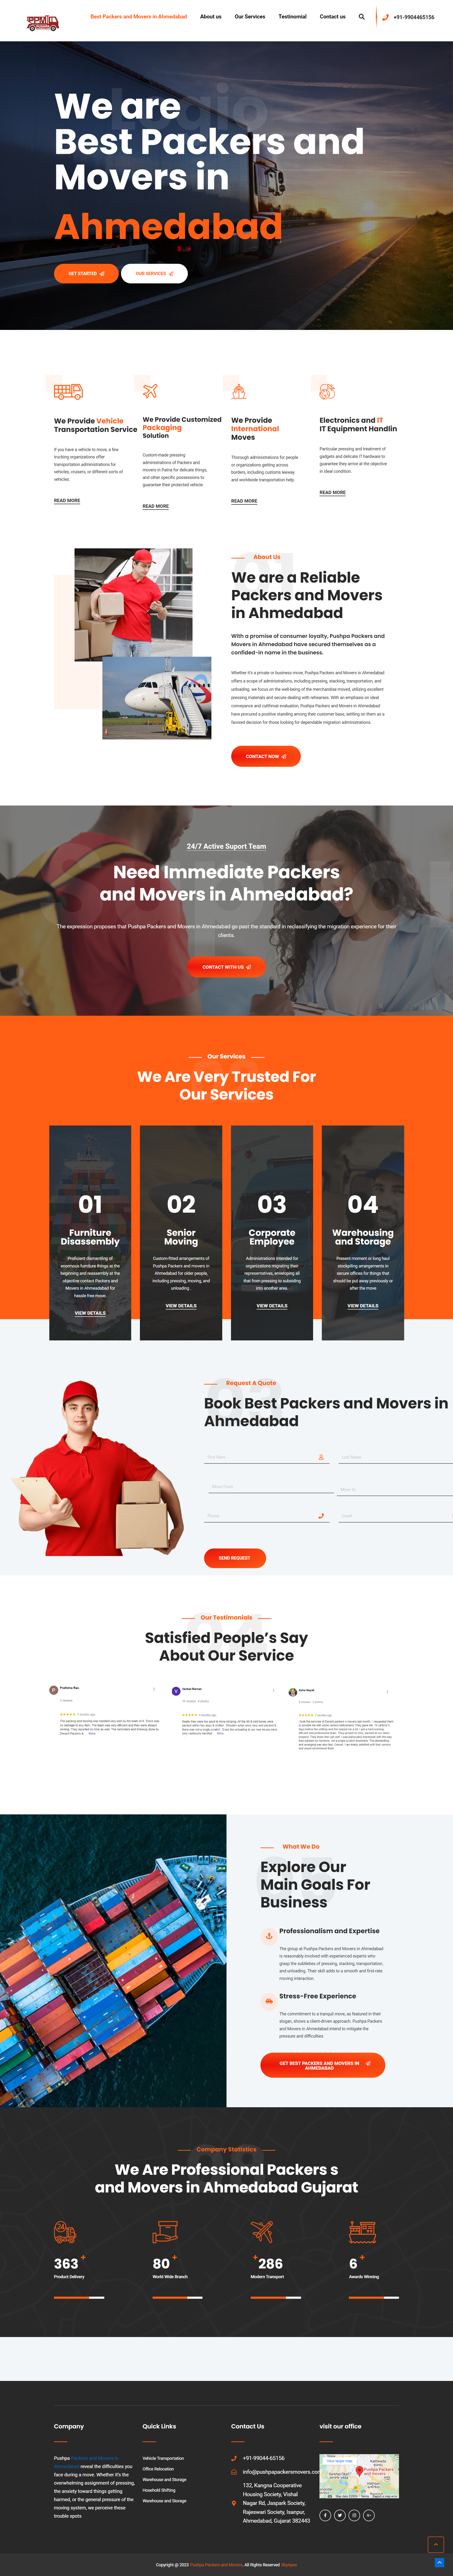 Pushpa Packers and Movers